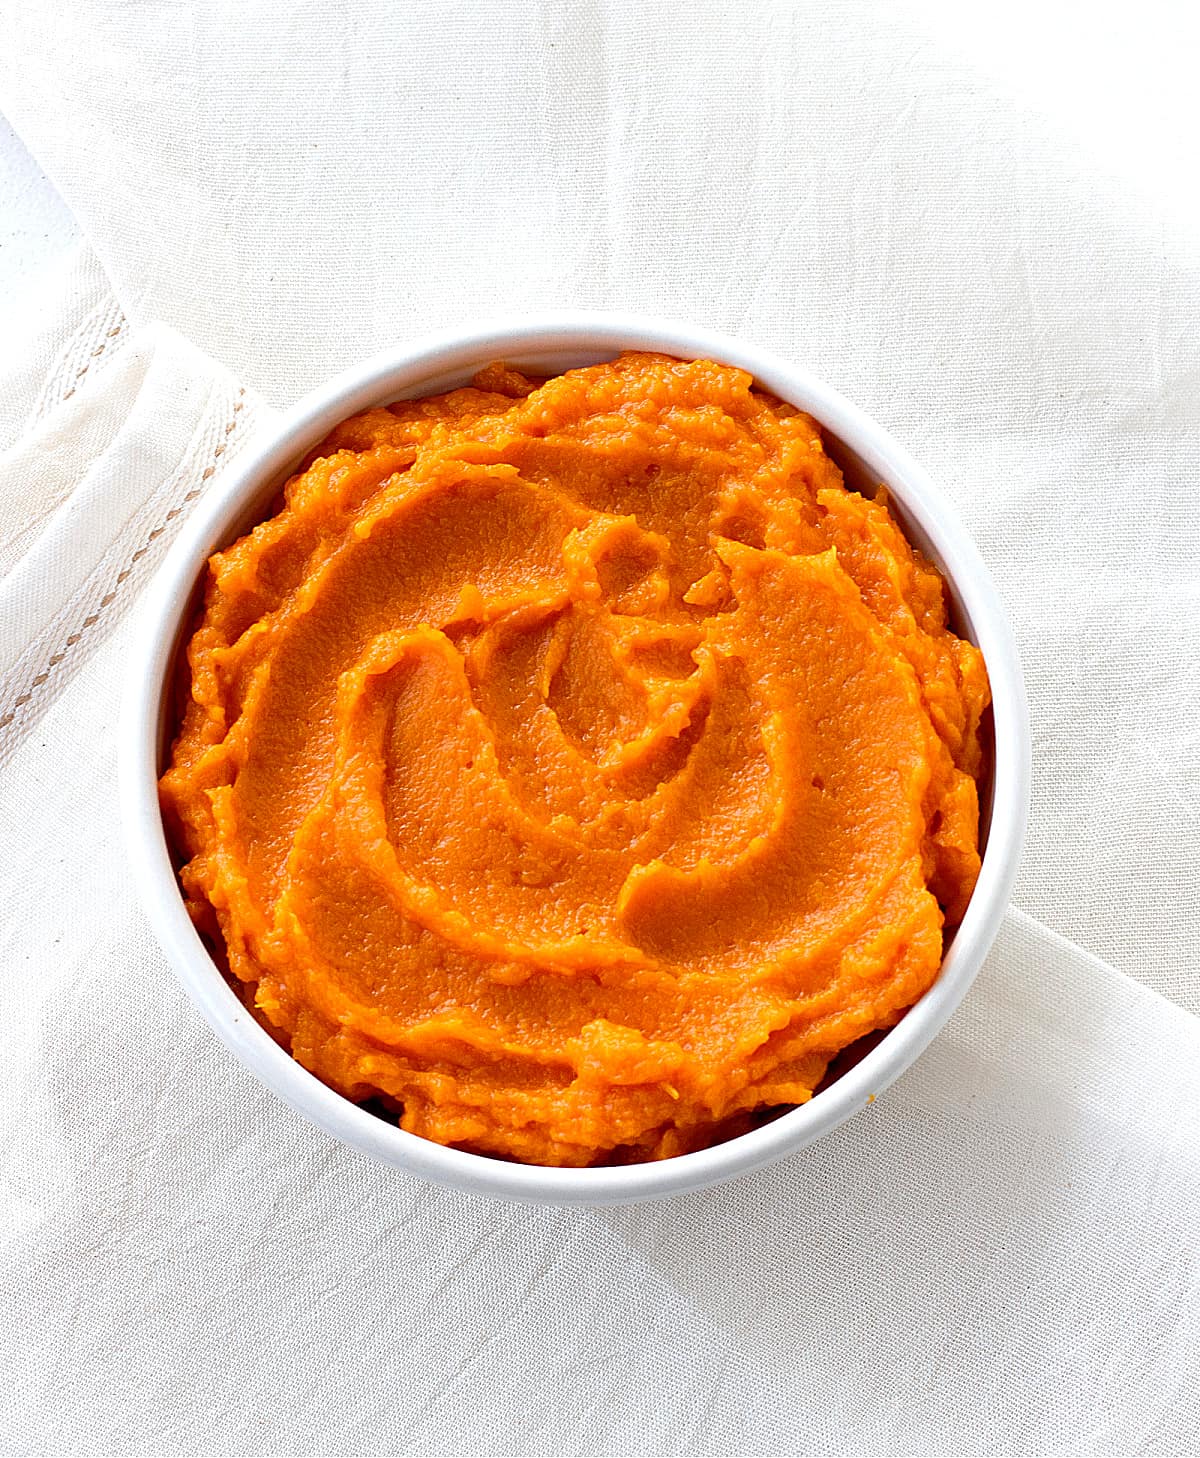 On a whitish piece of linen, a white bowl filled with pumpkin puree.